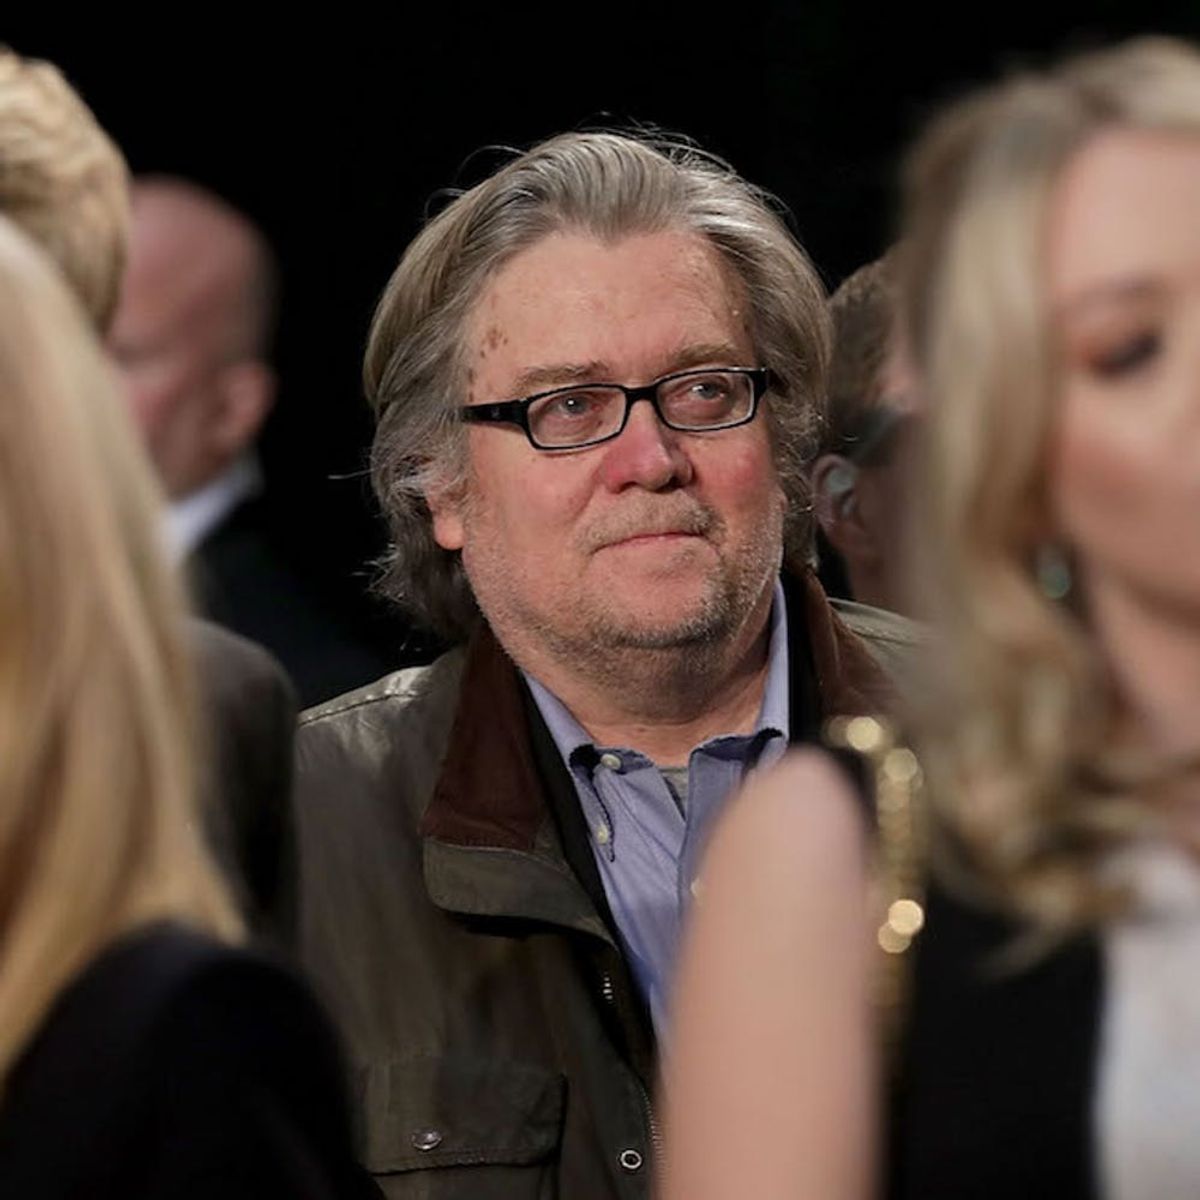 4 Reasons People Are Freaking Out About Trump’s New Chief Strategist